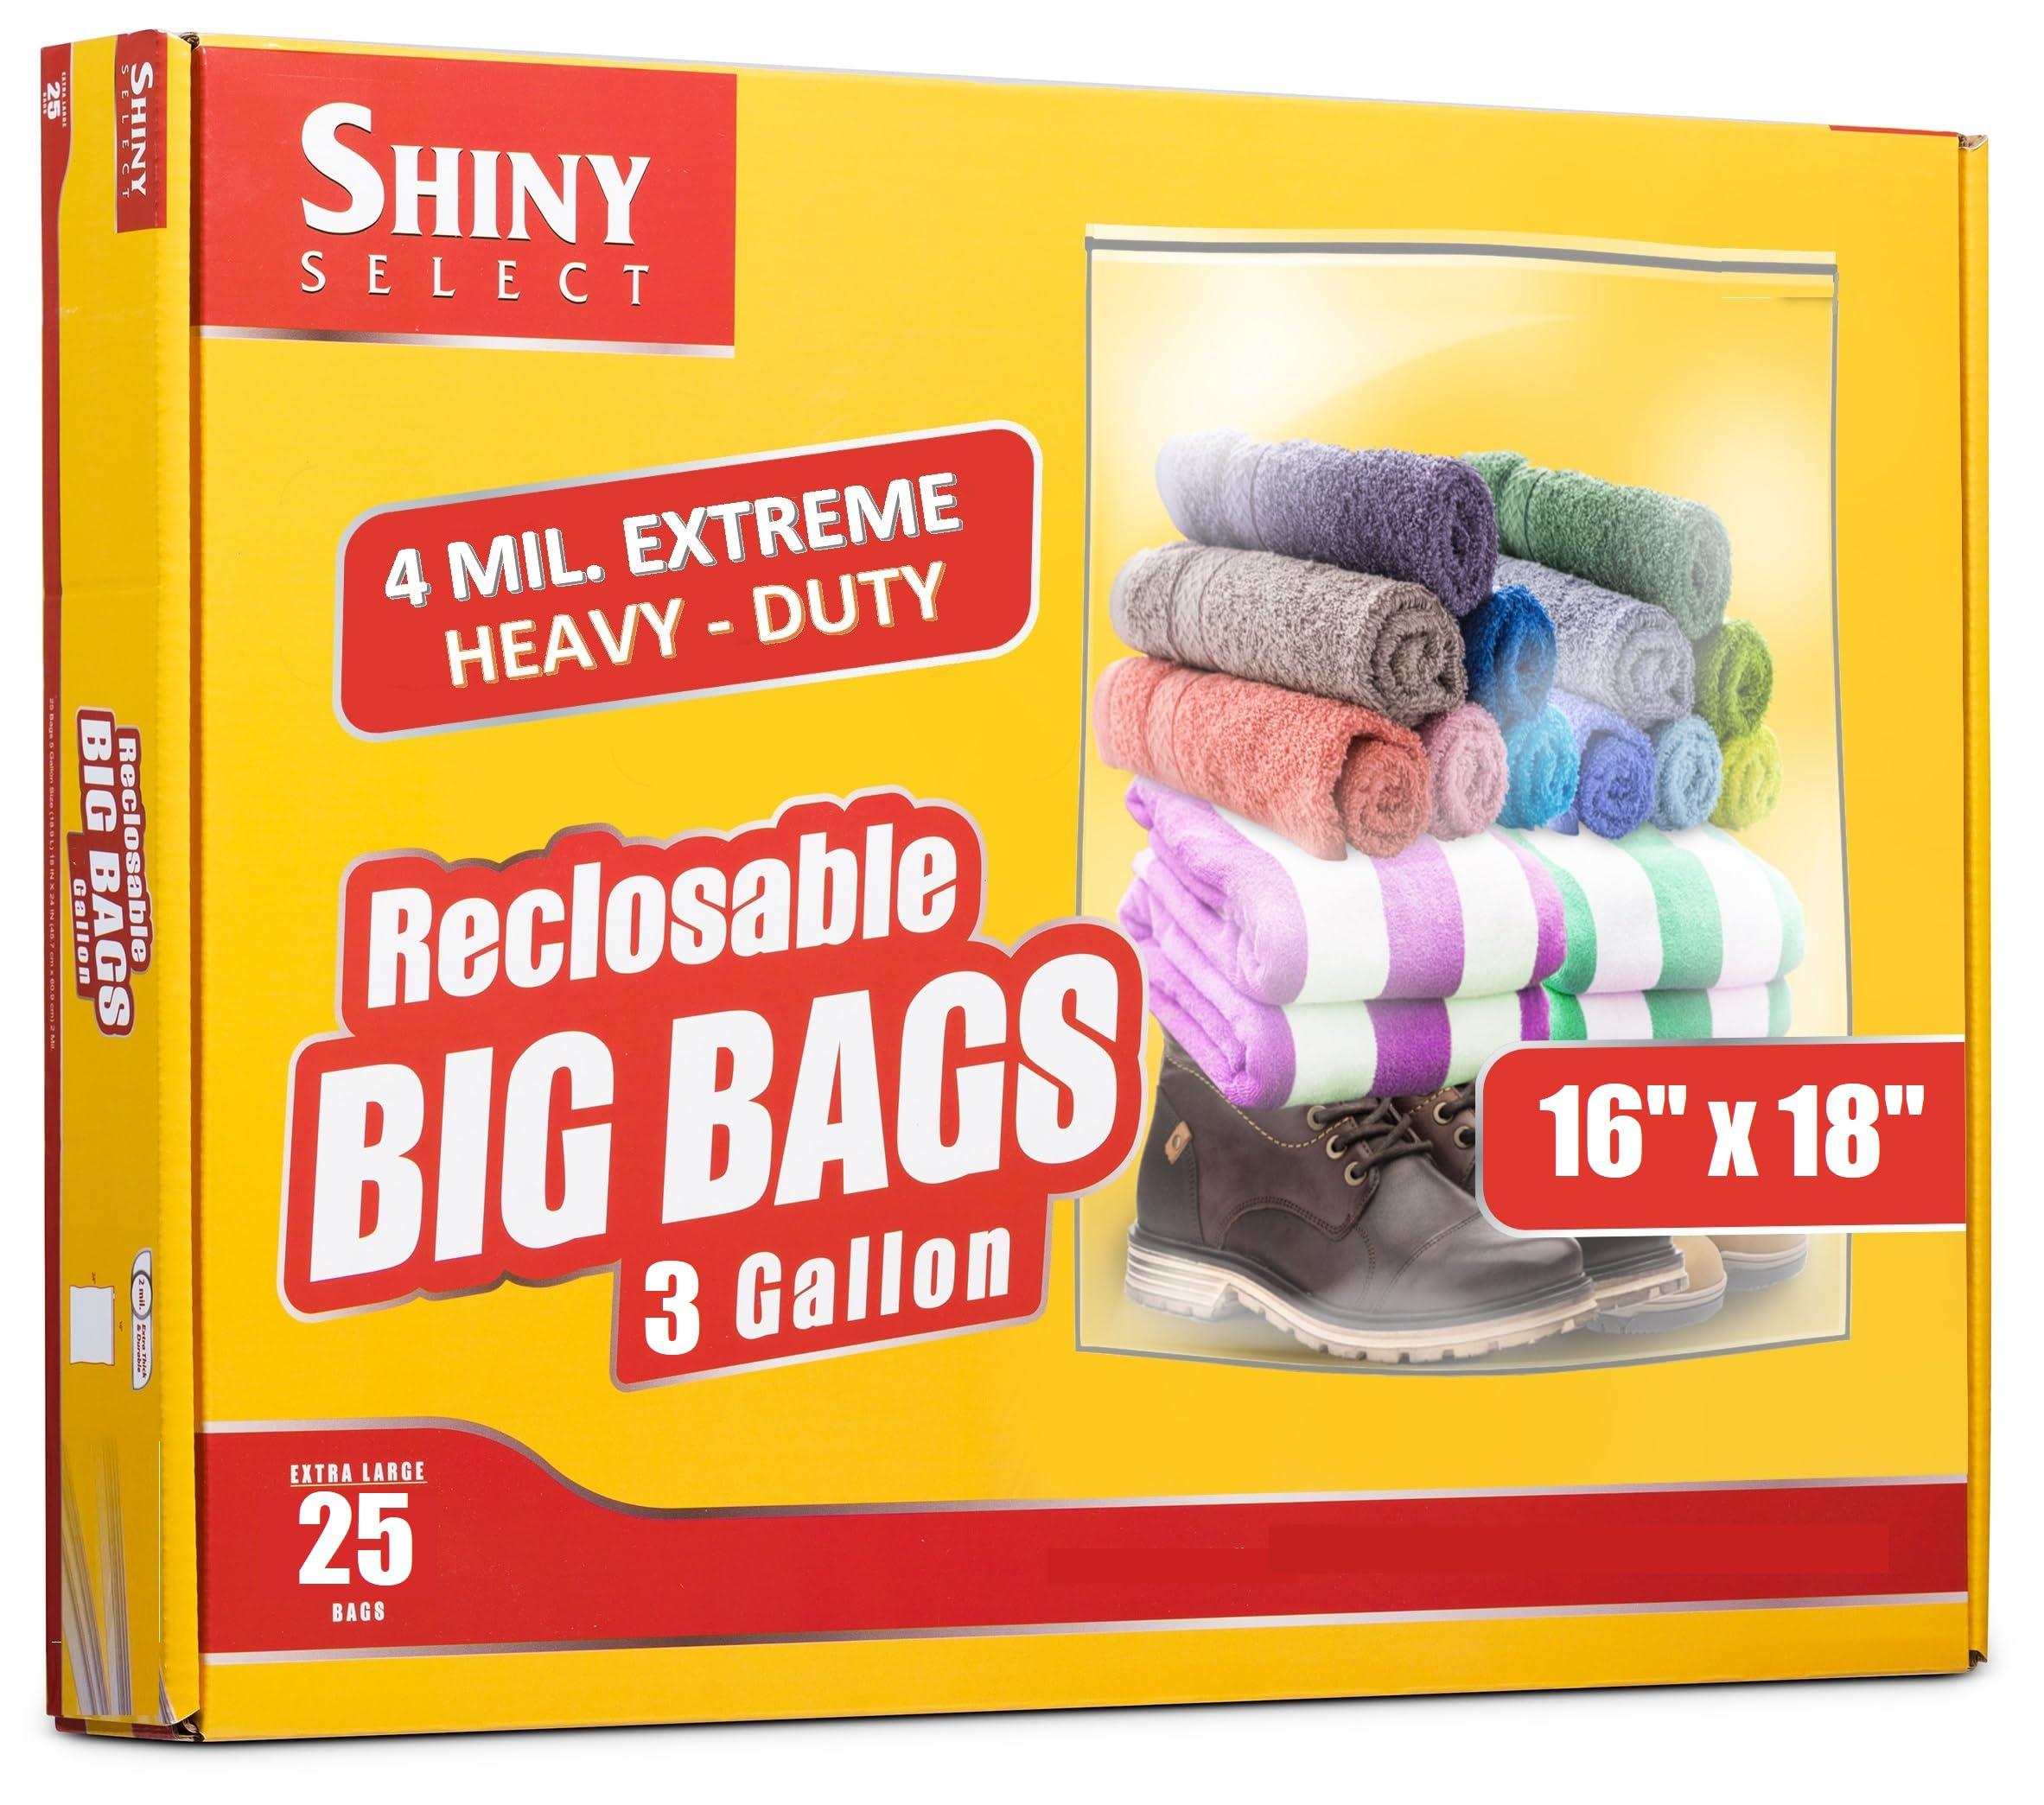 Shiny Select 25 count large 3 gallon big storage bags - 4 mill. extreme thick - heavy duty clear plastic, for food freezer lunch - strong 